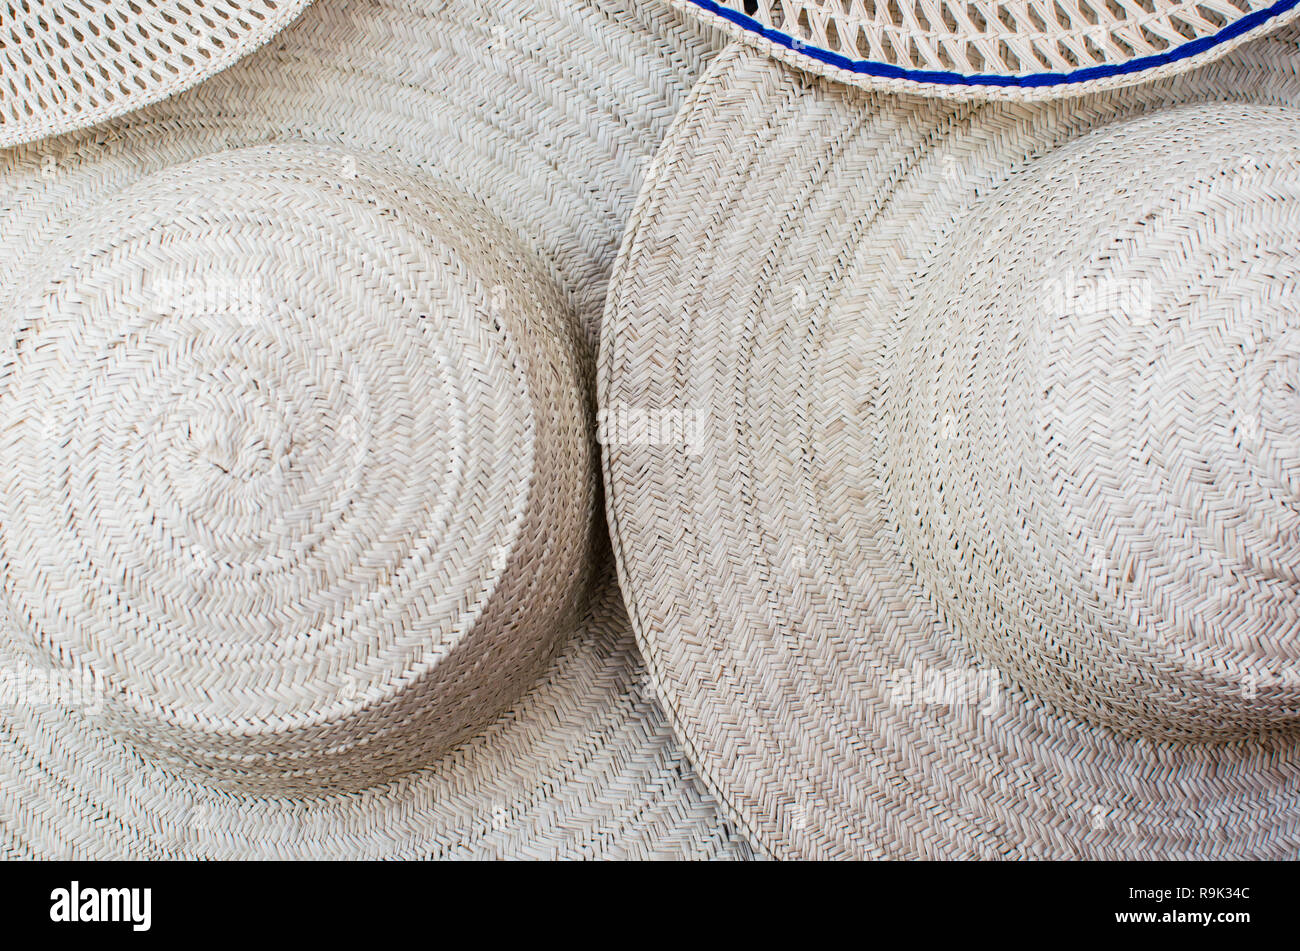 A variety of Panamanian hats for sale Stock Photo